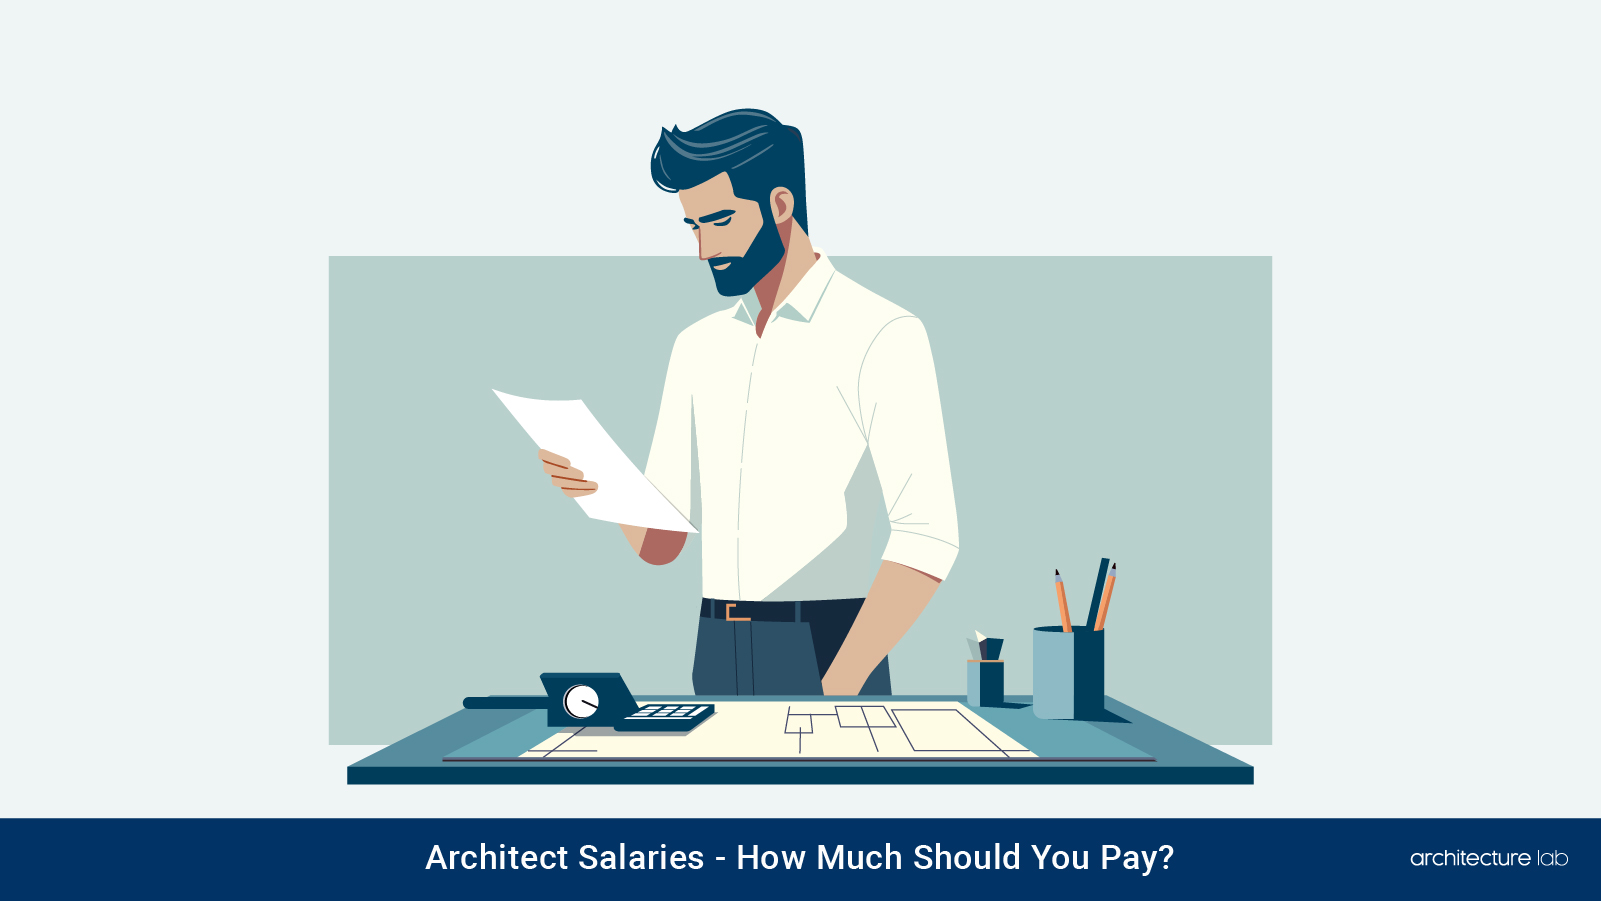 Architect salaries: how much should you pay?